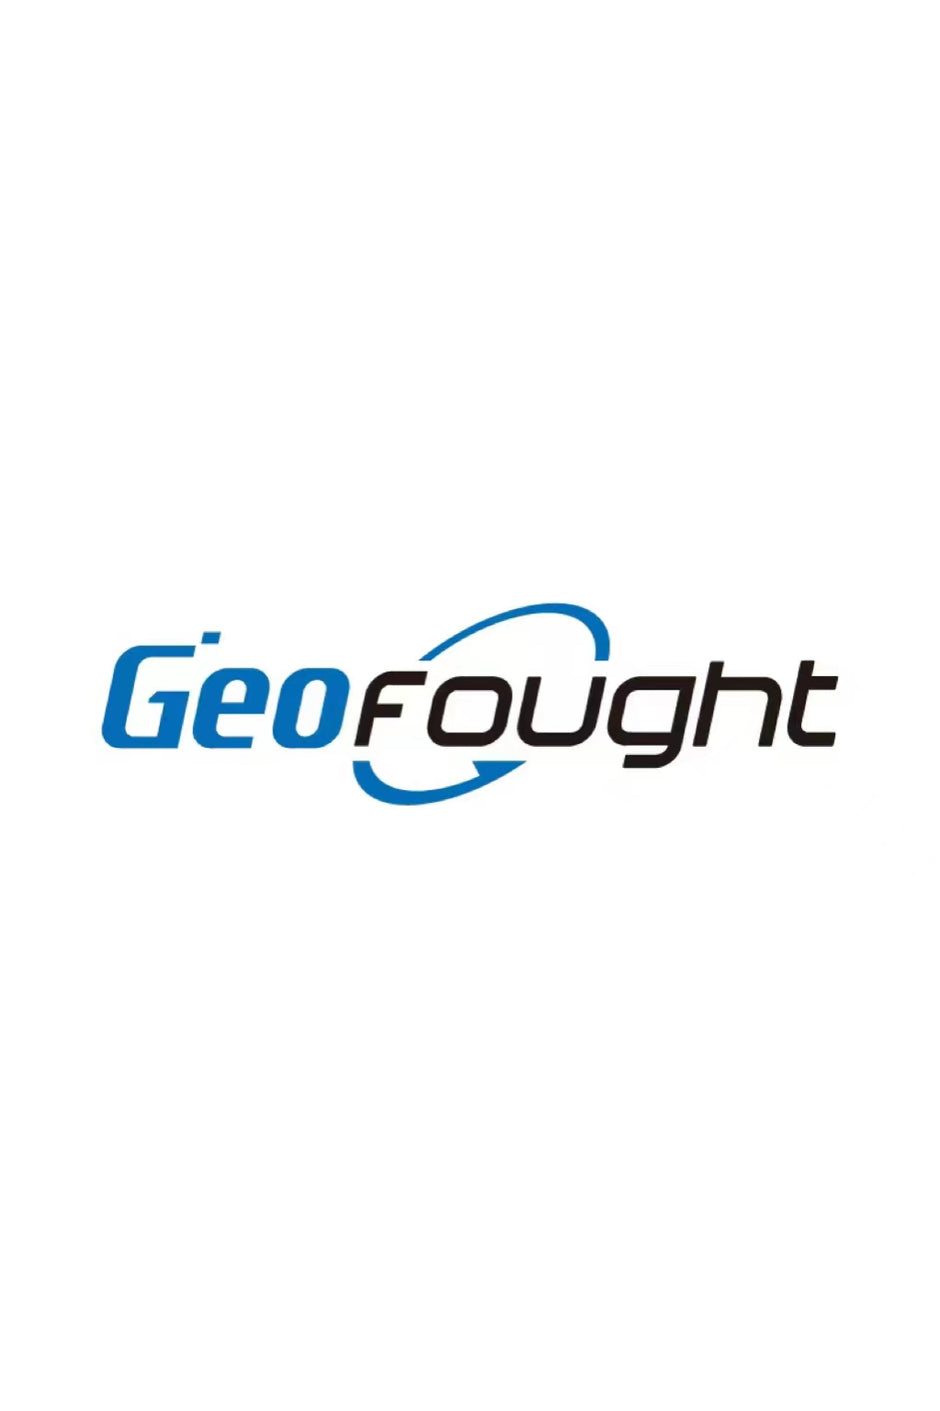 Geofought Brand Story